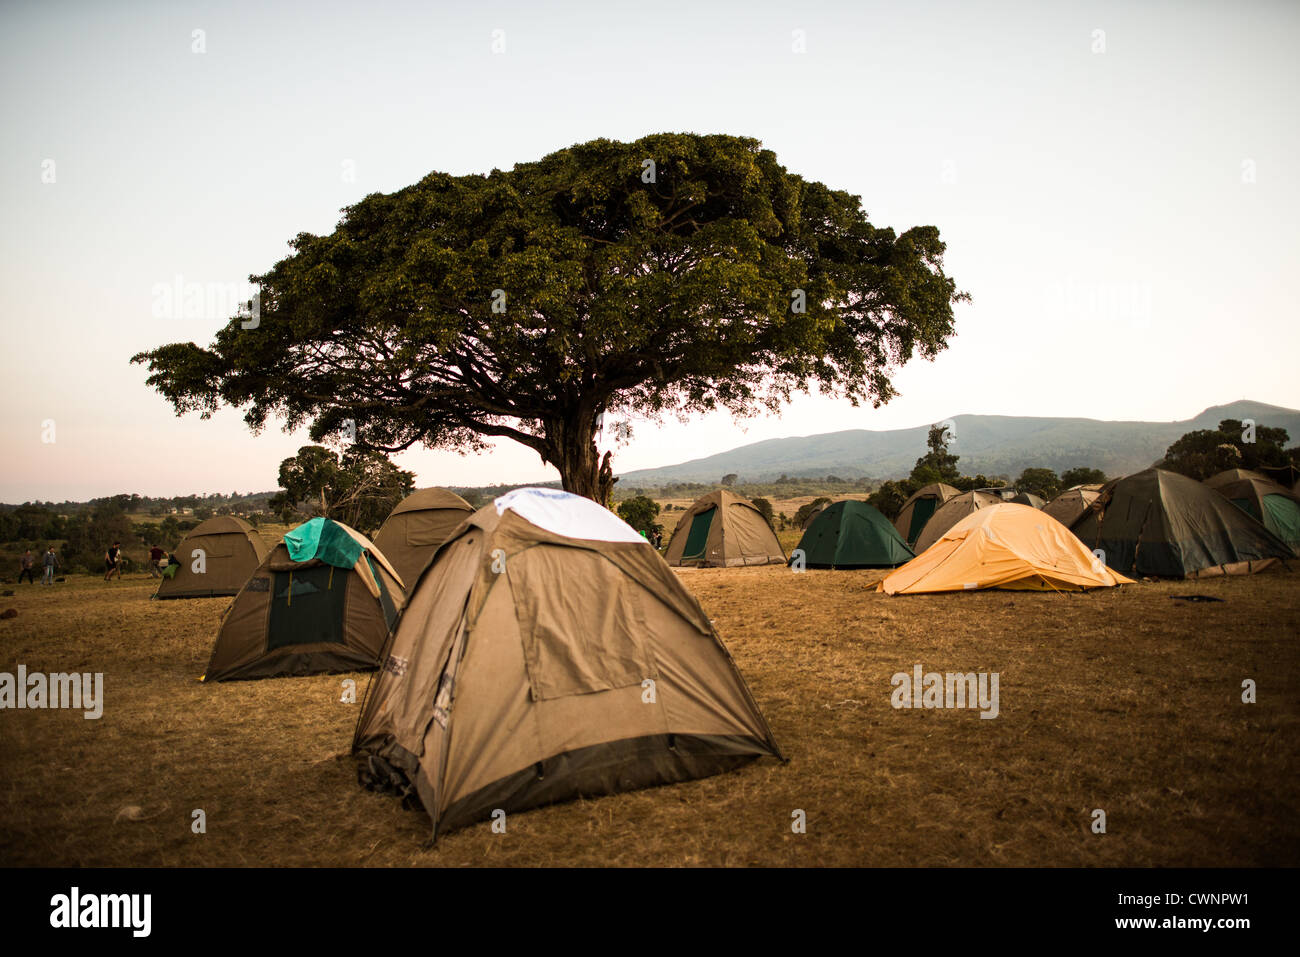 NGORONGORO CONSERVATIONAL AREA, Tanzania - Tents at dusk at the Simba Campsite on the rim of Ngorongoro Crater in the Ngorongoro Conservation Area, part of Tanzania's northern circuit of national parks and nature preserves. Stock Photo